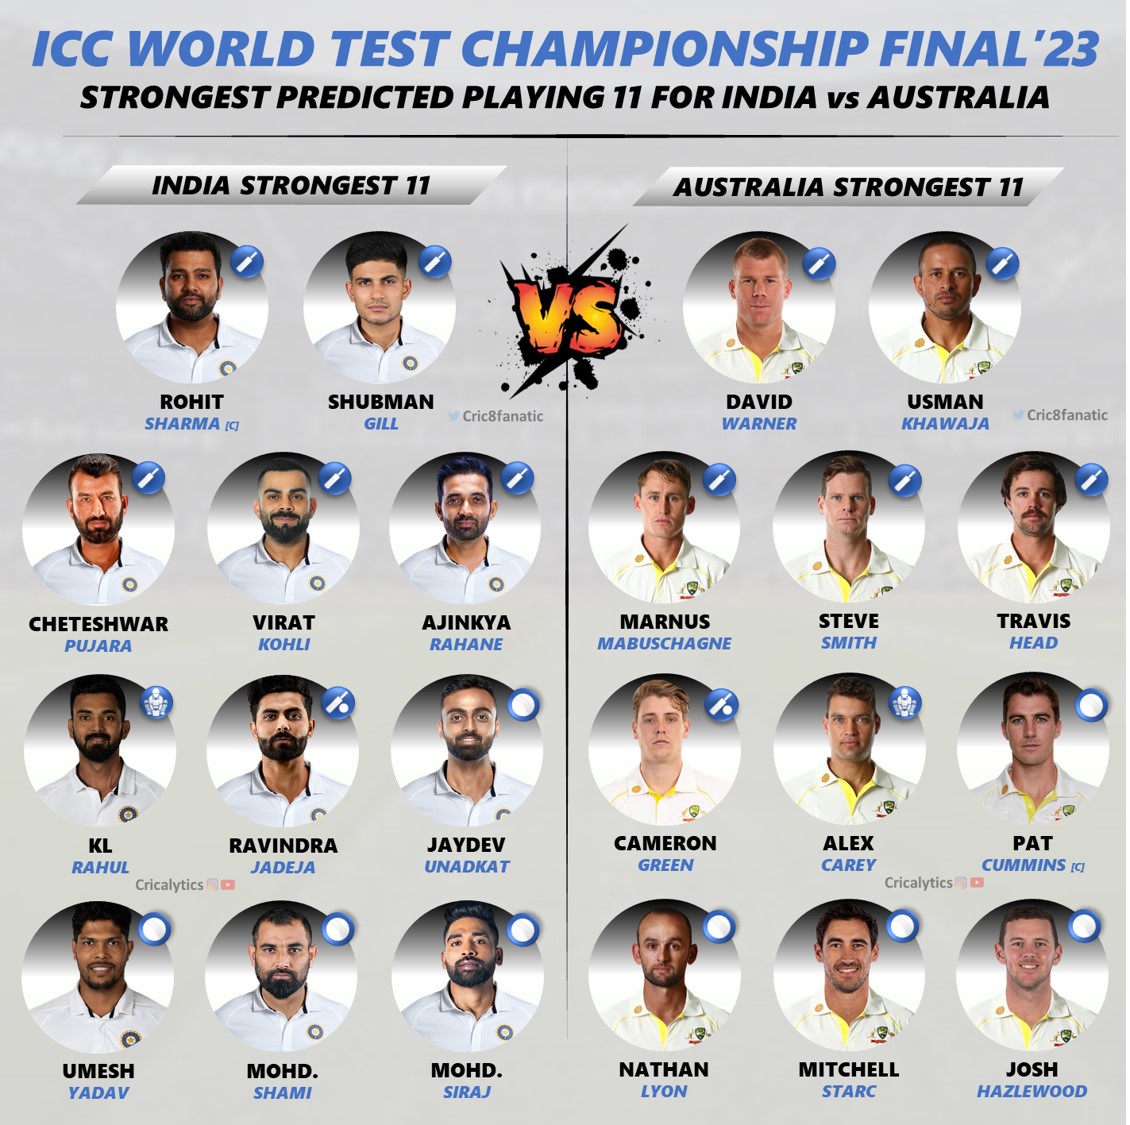 icc wtc final 2023 confirmed best playing 11 for india vs australia